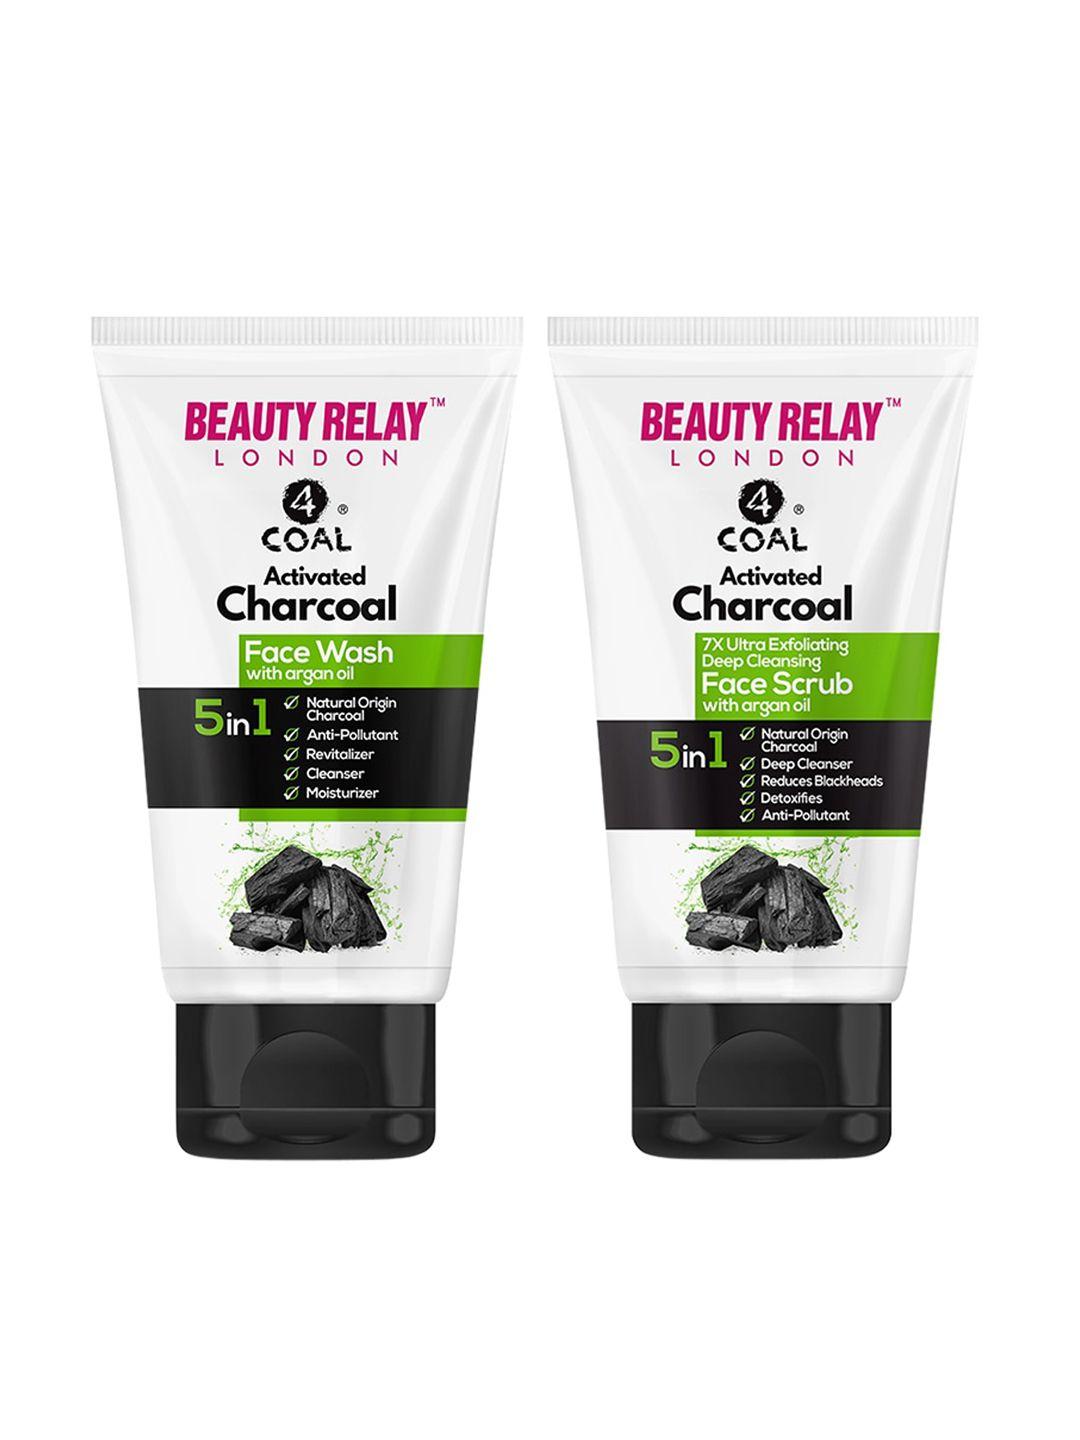 beautyrelay london 4coal activated charcoal face wash & scrub 200ml - buy 1 get 1 free